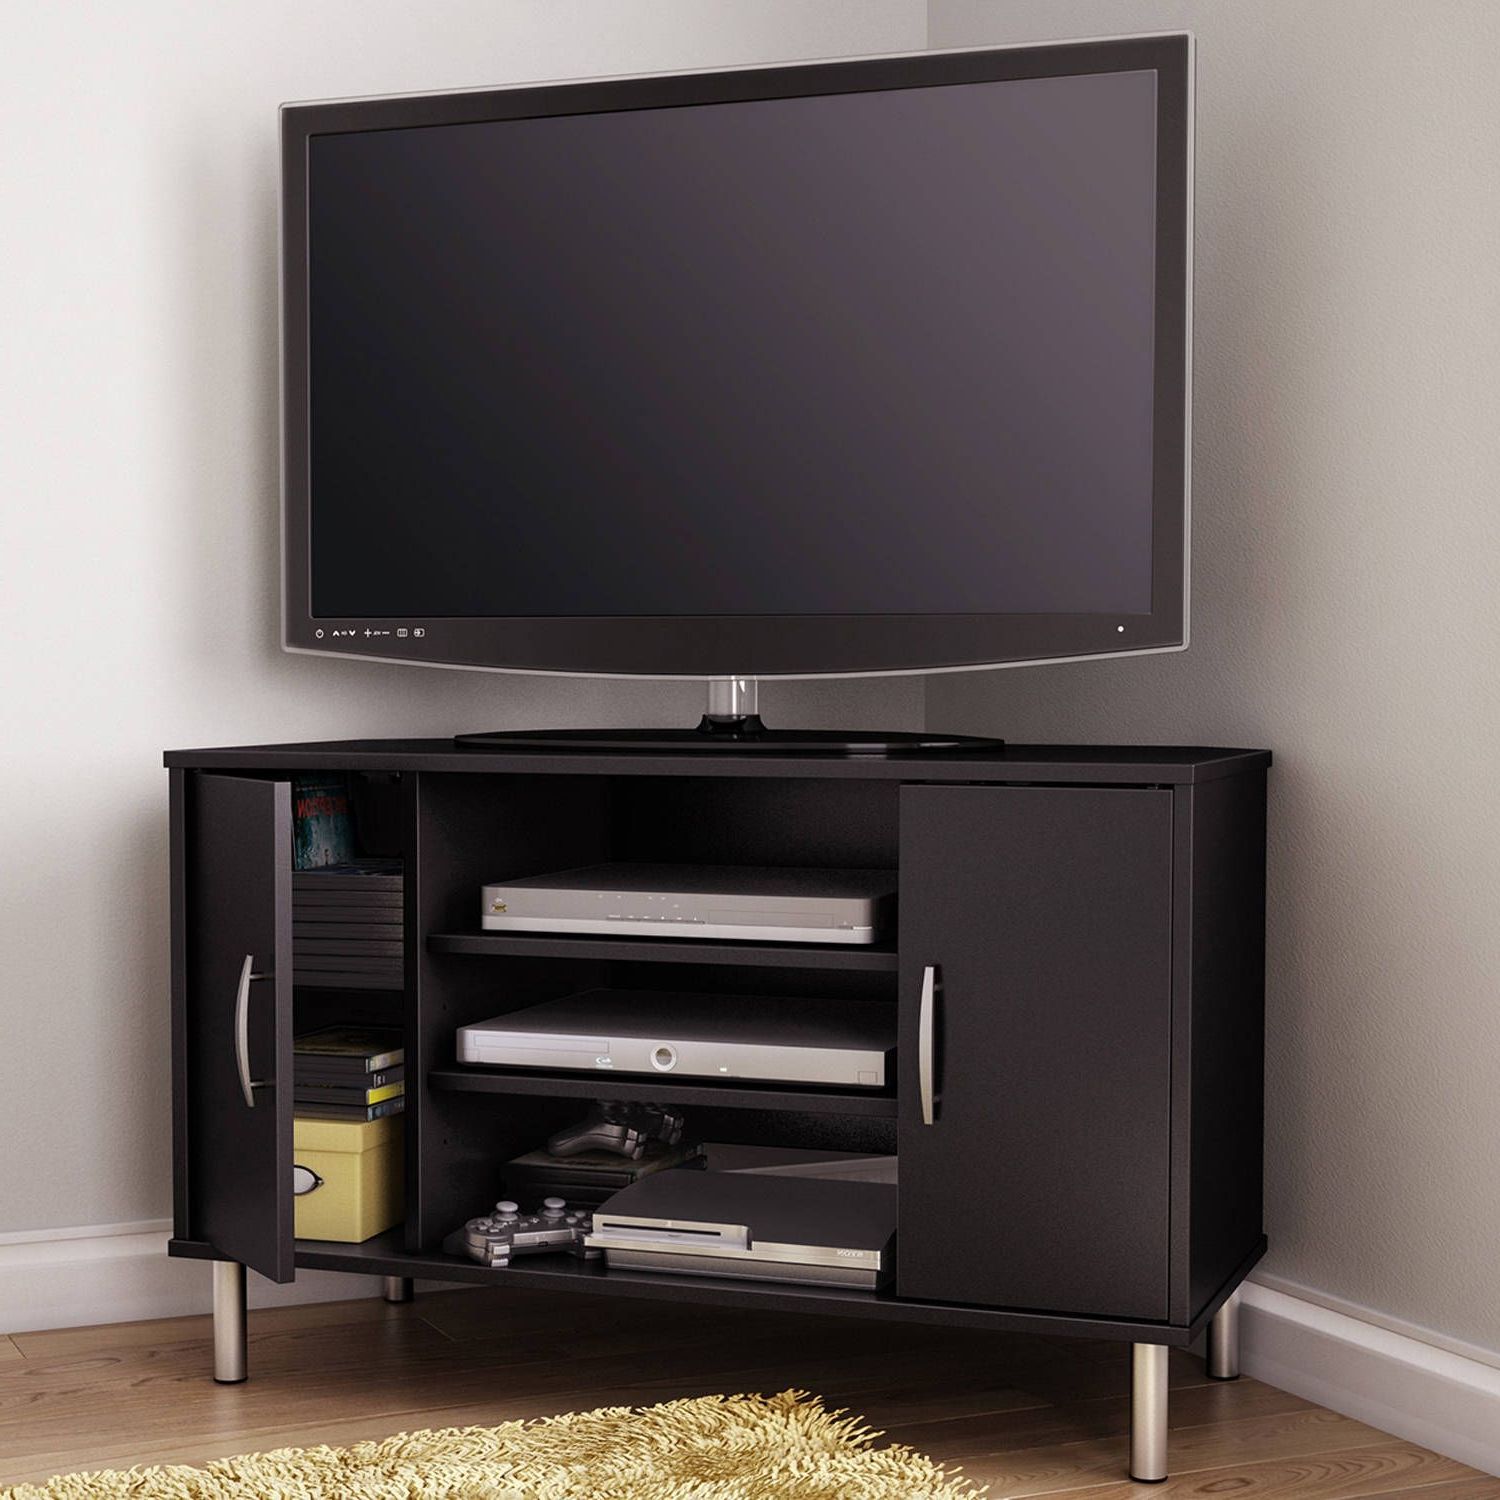 2017 Corner Tv Cabinets For Flat Screens With Doors Intended For Corner Tv Tables For Flat Screens (View 4 of 20)